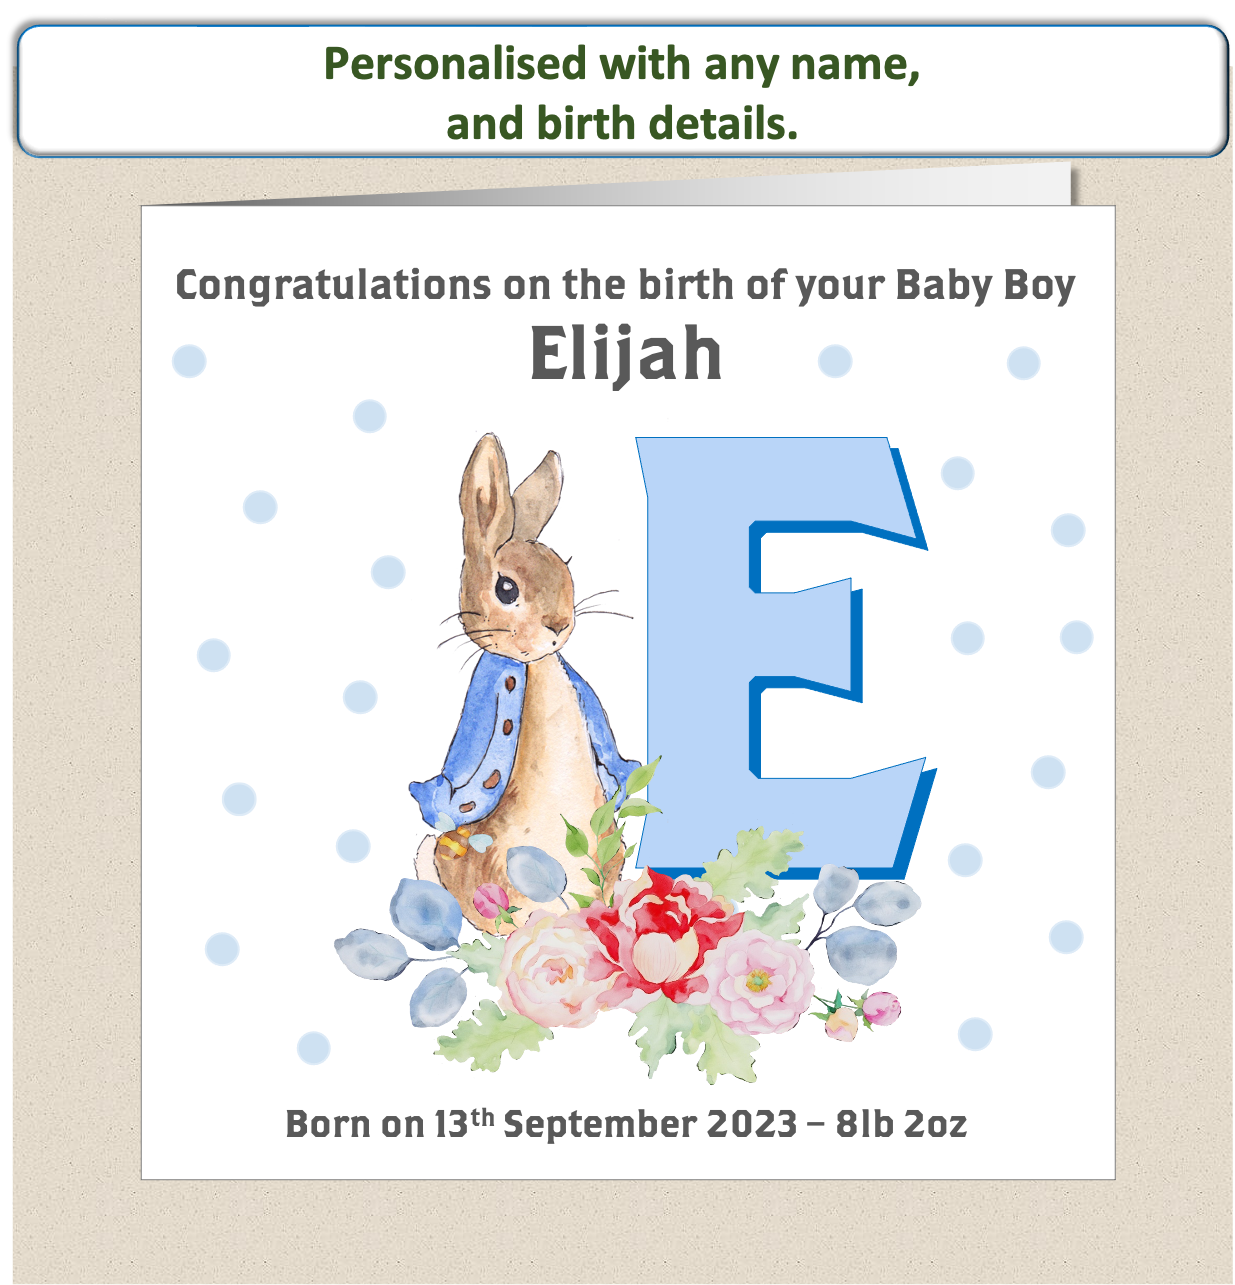 Personalised New Baby Arrival Congratulations Card - Peter Rabbit Blue